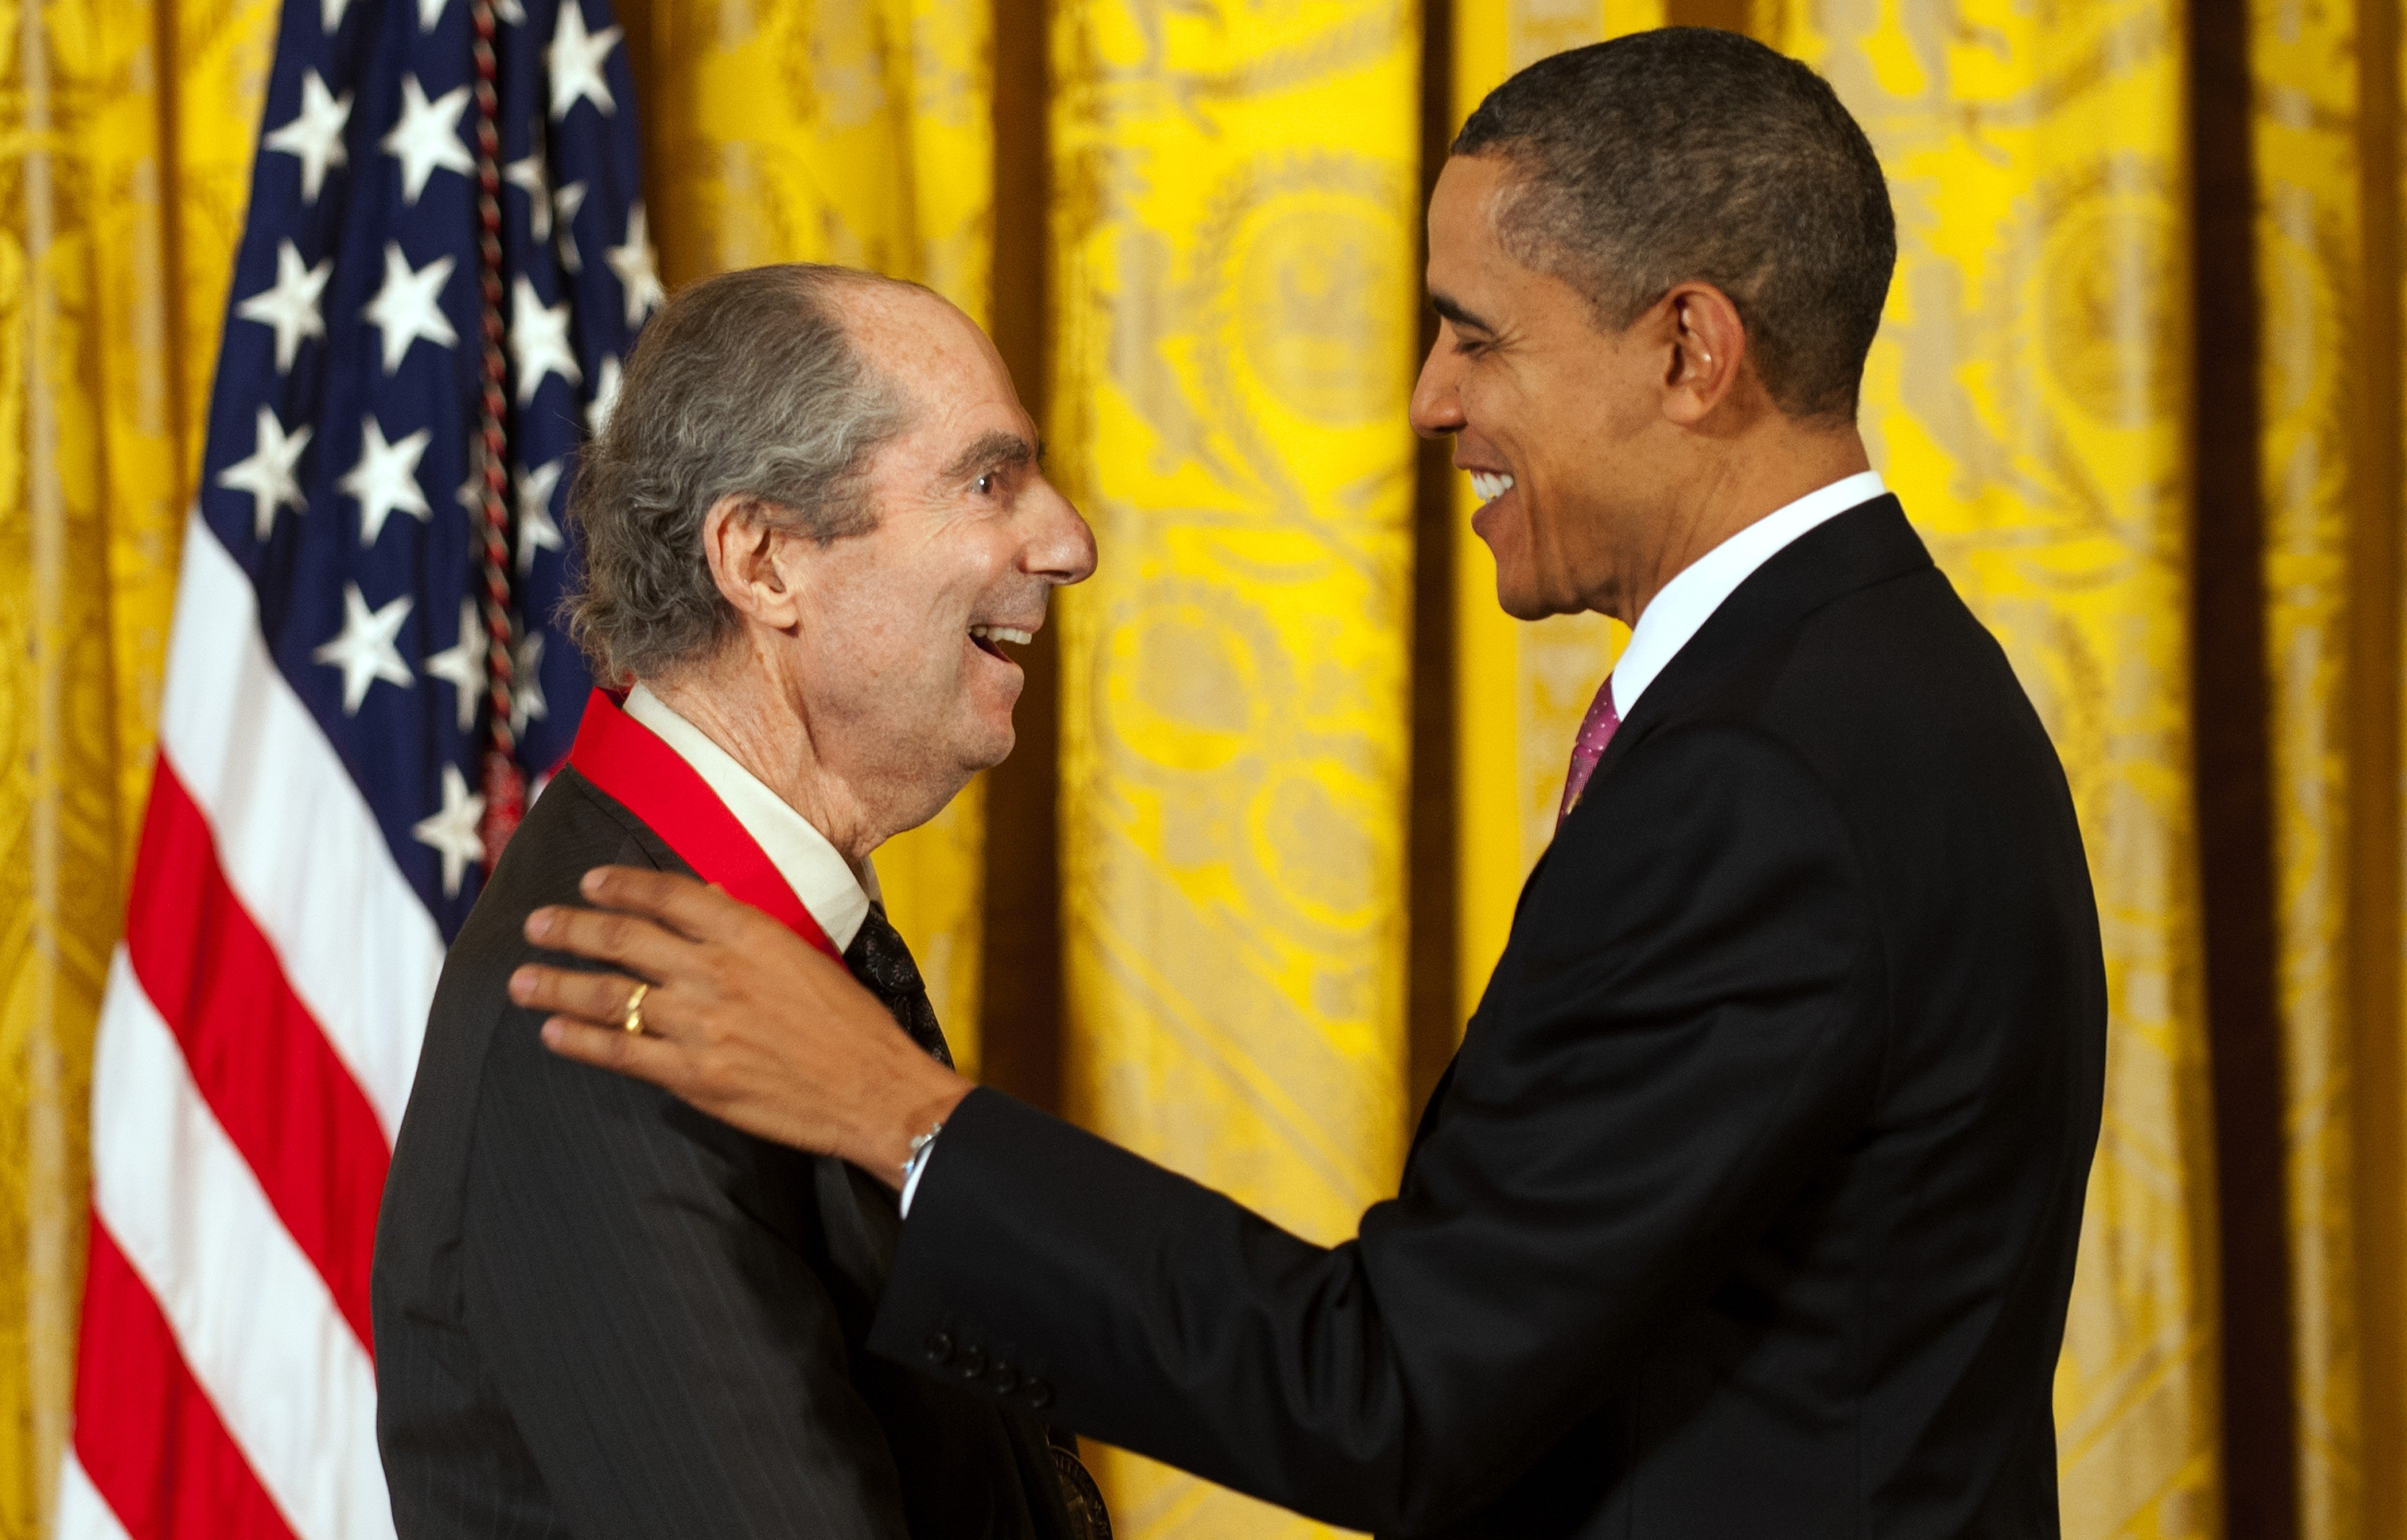 Barack Obama presents the National Humanities Medal to Philip Roth at the White House in 2011